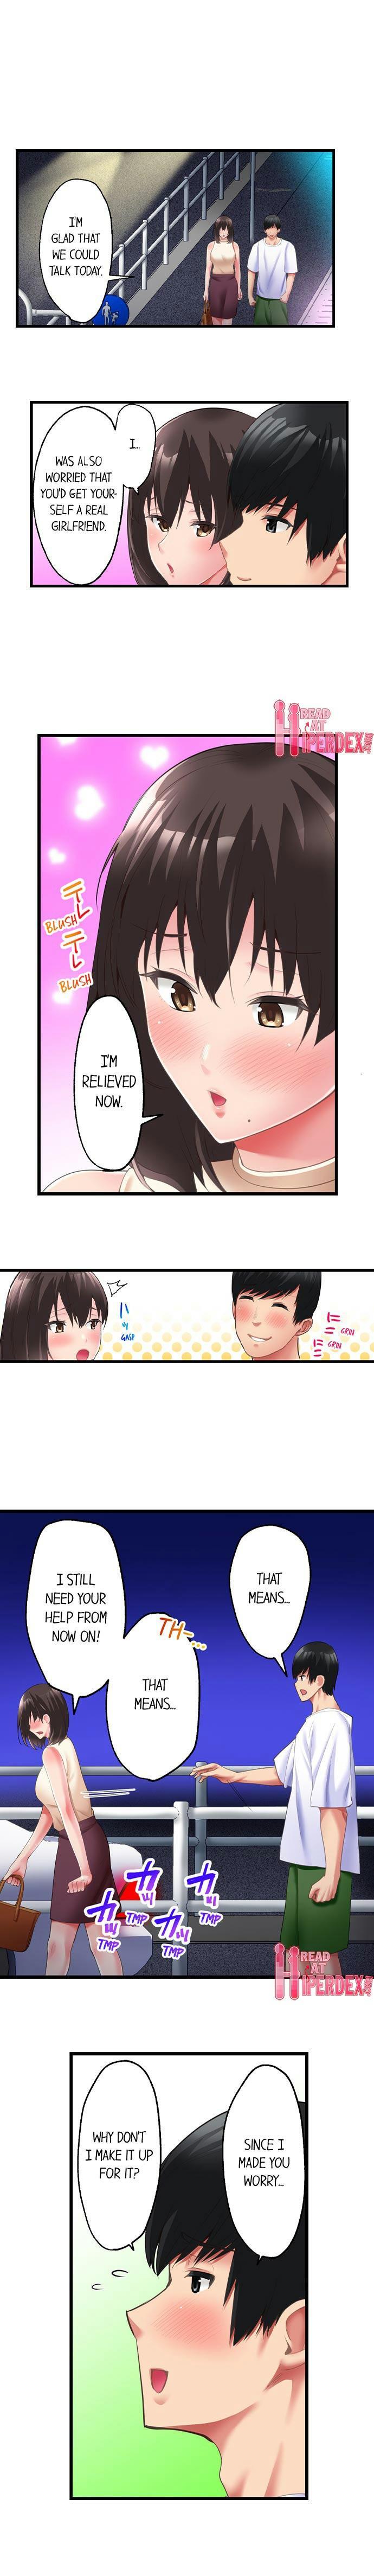 Freeteenporn [Kayanoi Ino] Busted by my Co-Worker 18/18 [English] Completed Oral Sex - Page 170